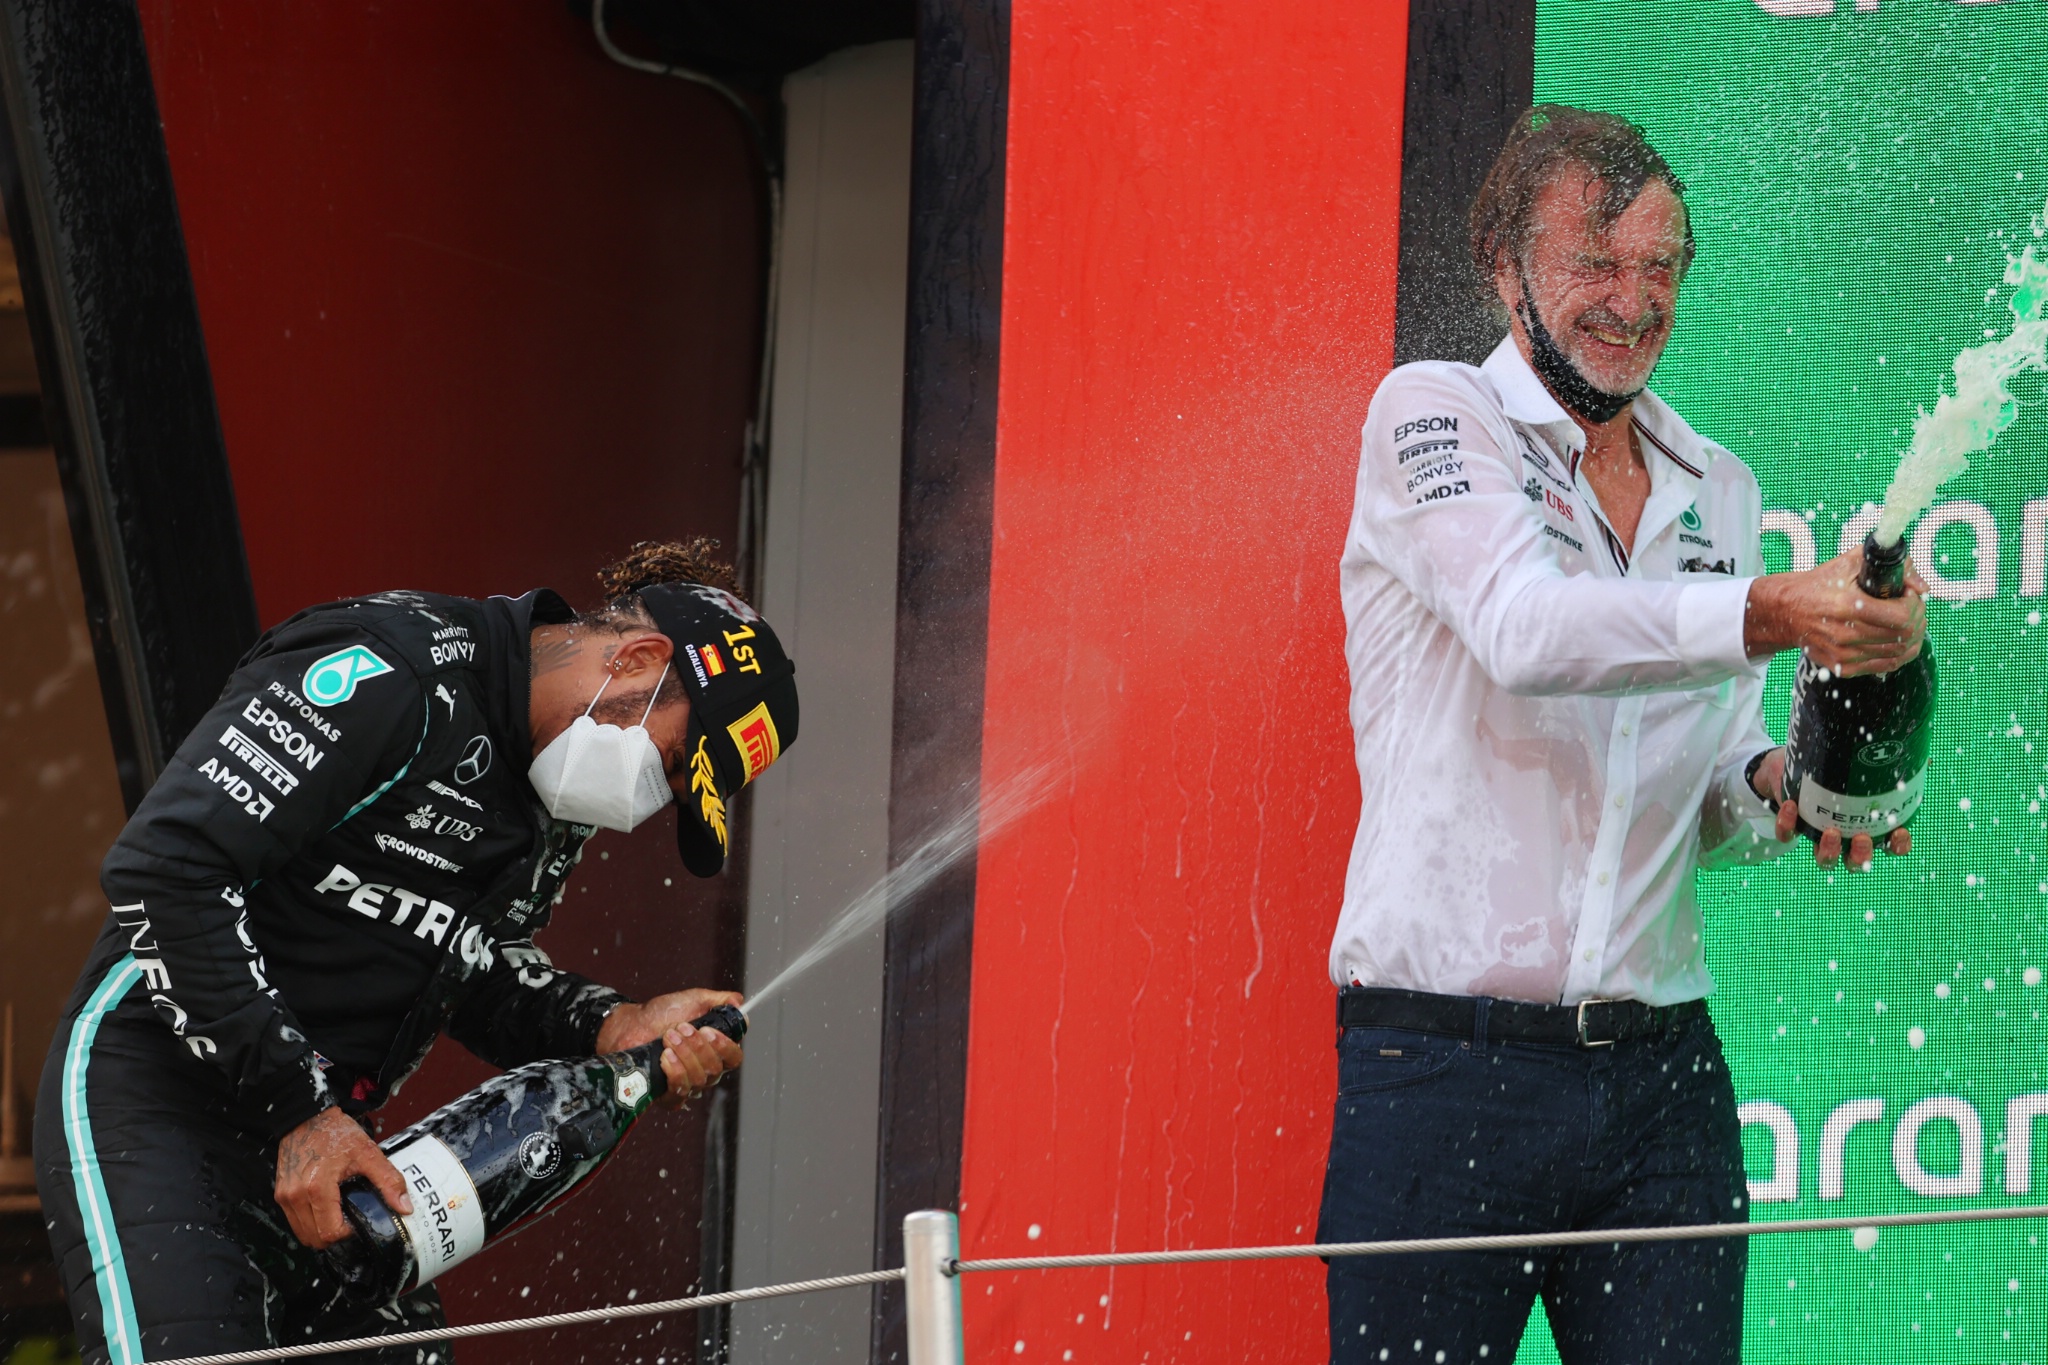 1st place Lewis Hamilton (GBR) Mercedes AMG F1 with Sir Jim Ratcliffe Chief Executive Officer of